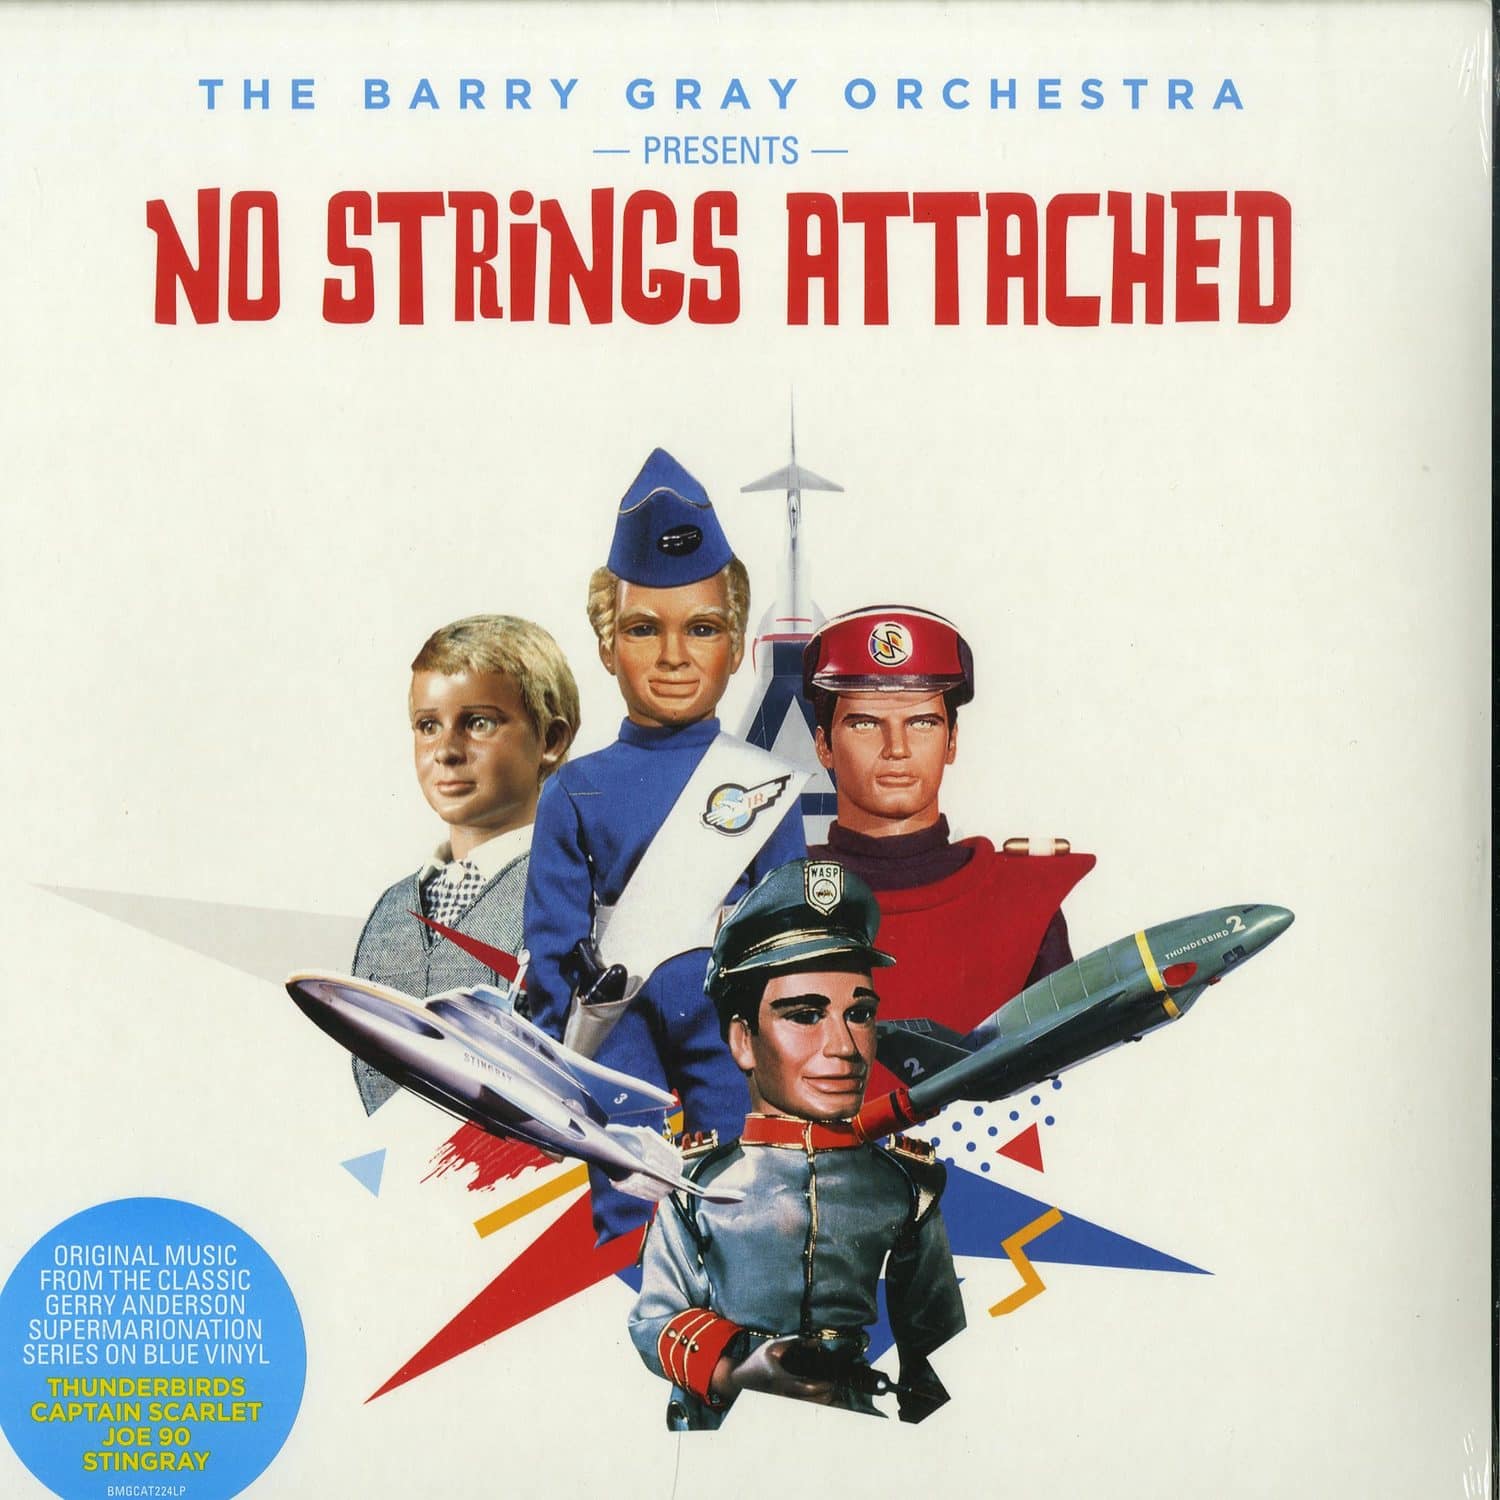 The Barry Gray Orchestra - NO STRINGS ATTACHED 